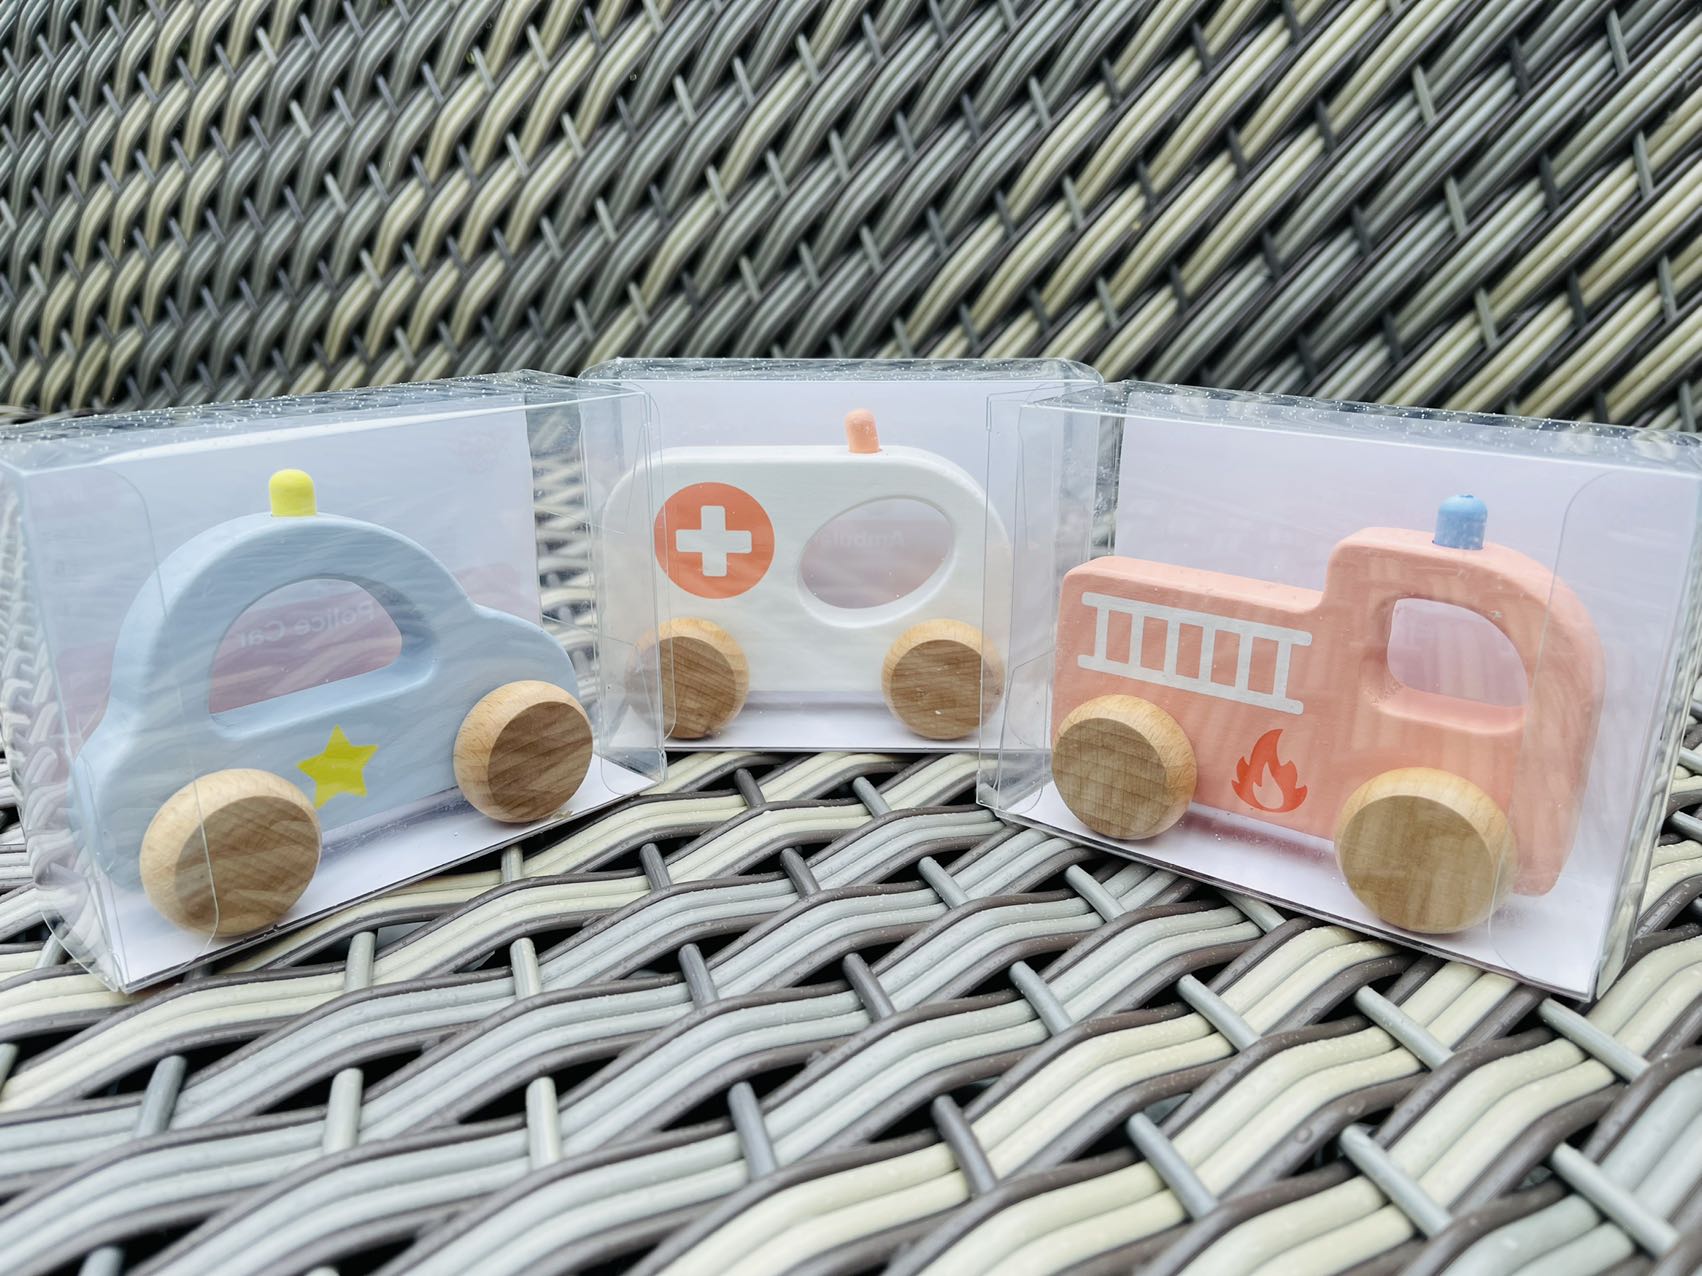 Tooky-Toy-Wooden-Roller-Police-Car-Macarons-Colour-Medium-Size